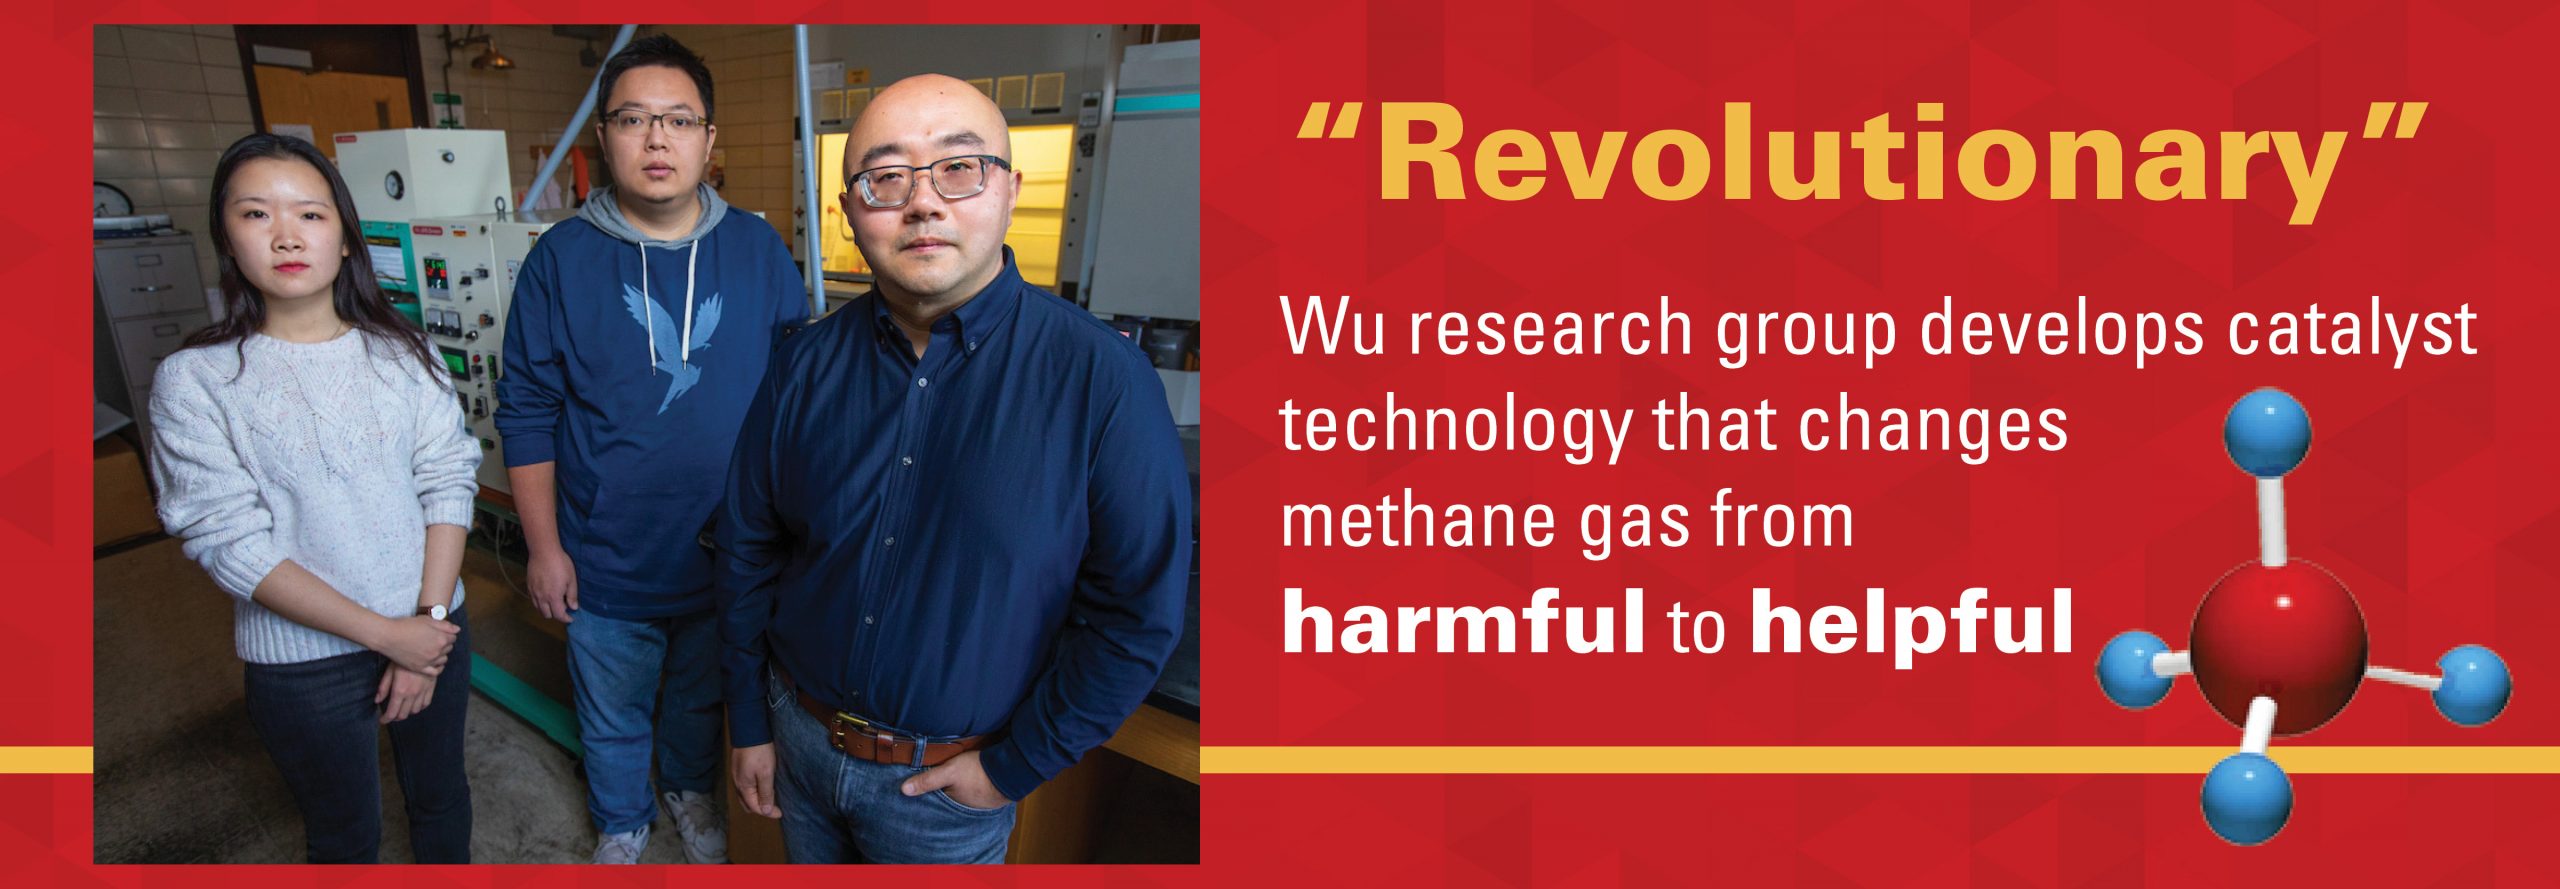 Wu research group research develops catalyst technology that changes methane gas from harmful to helpful